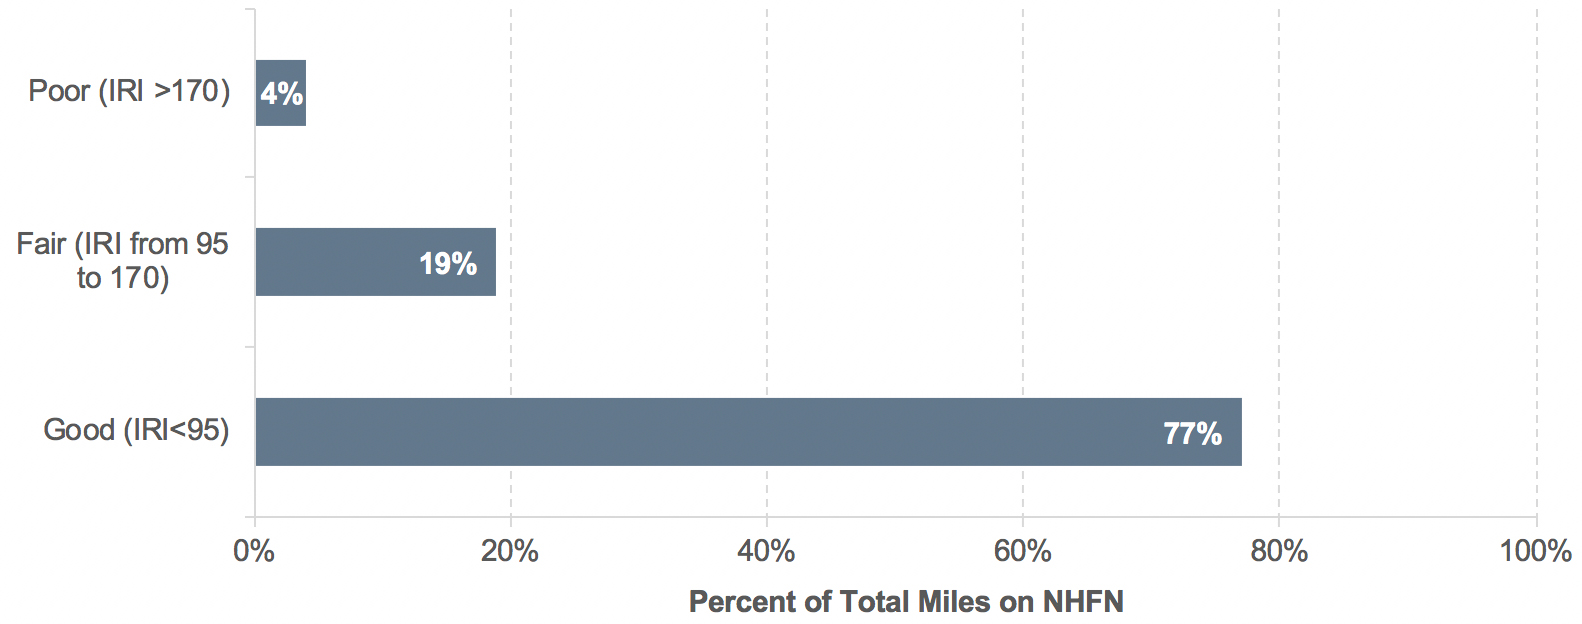 This bar chart shows the percentage of total miles on the NHFN that are either poor quality (when IRI is greater than 170), fair quality (when IRI is between 95 and 170), good quality (when the IRI is less than 95), and acceptable quality (which is defined as either good or fair quality). The least number of miles are defined as poor quality, at just 4% of total miles on the NHFN; 19% of total miles on the NHFN are defined as fair quality, and 77% are defined as good quality. Thus, 96% of all miles on the NHFN are categorized as acceptable.